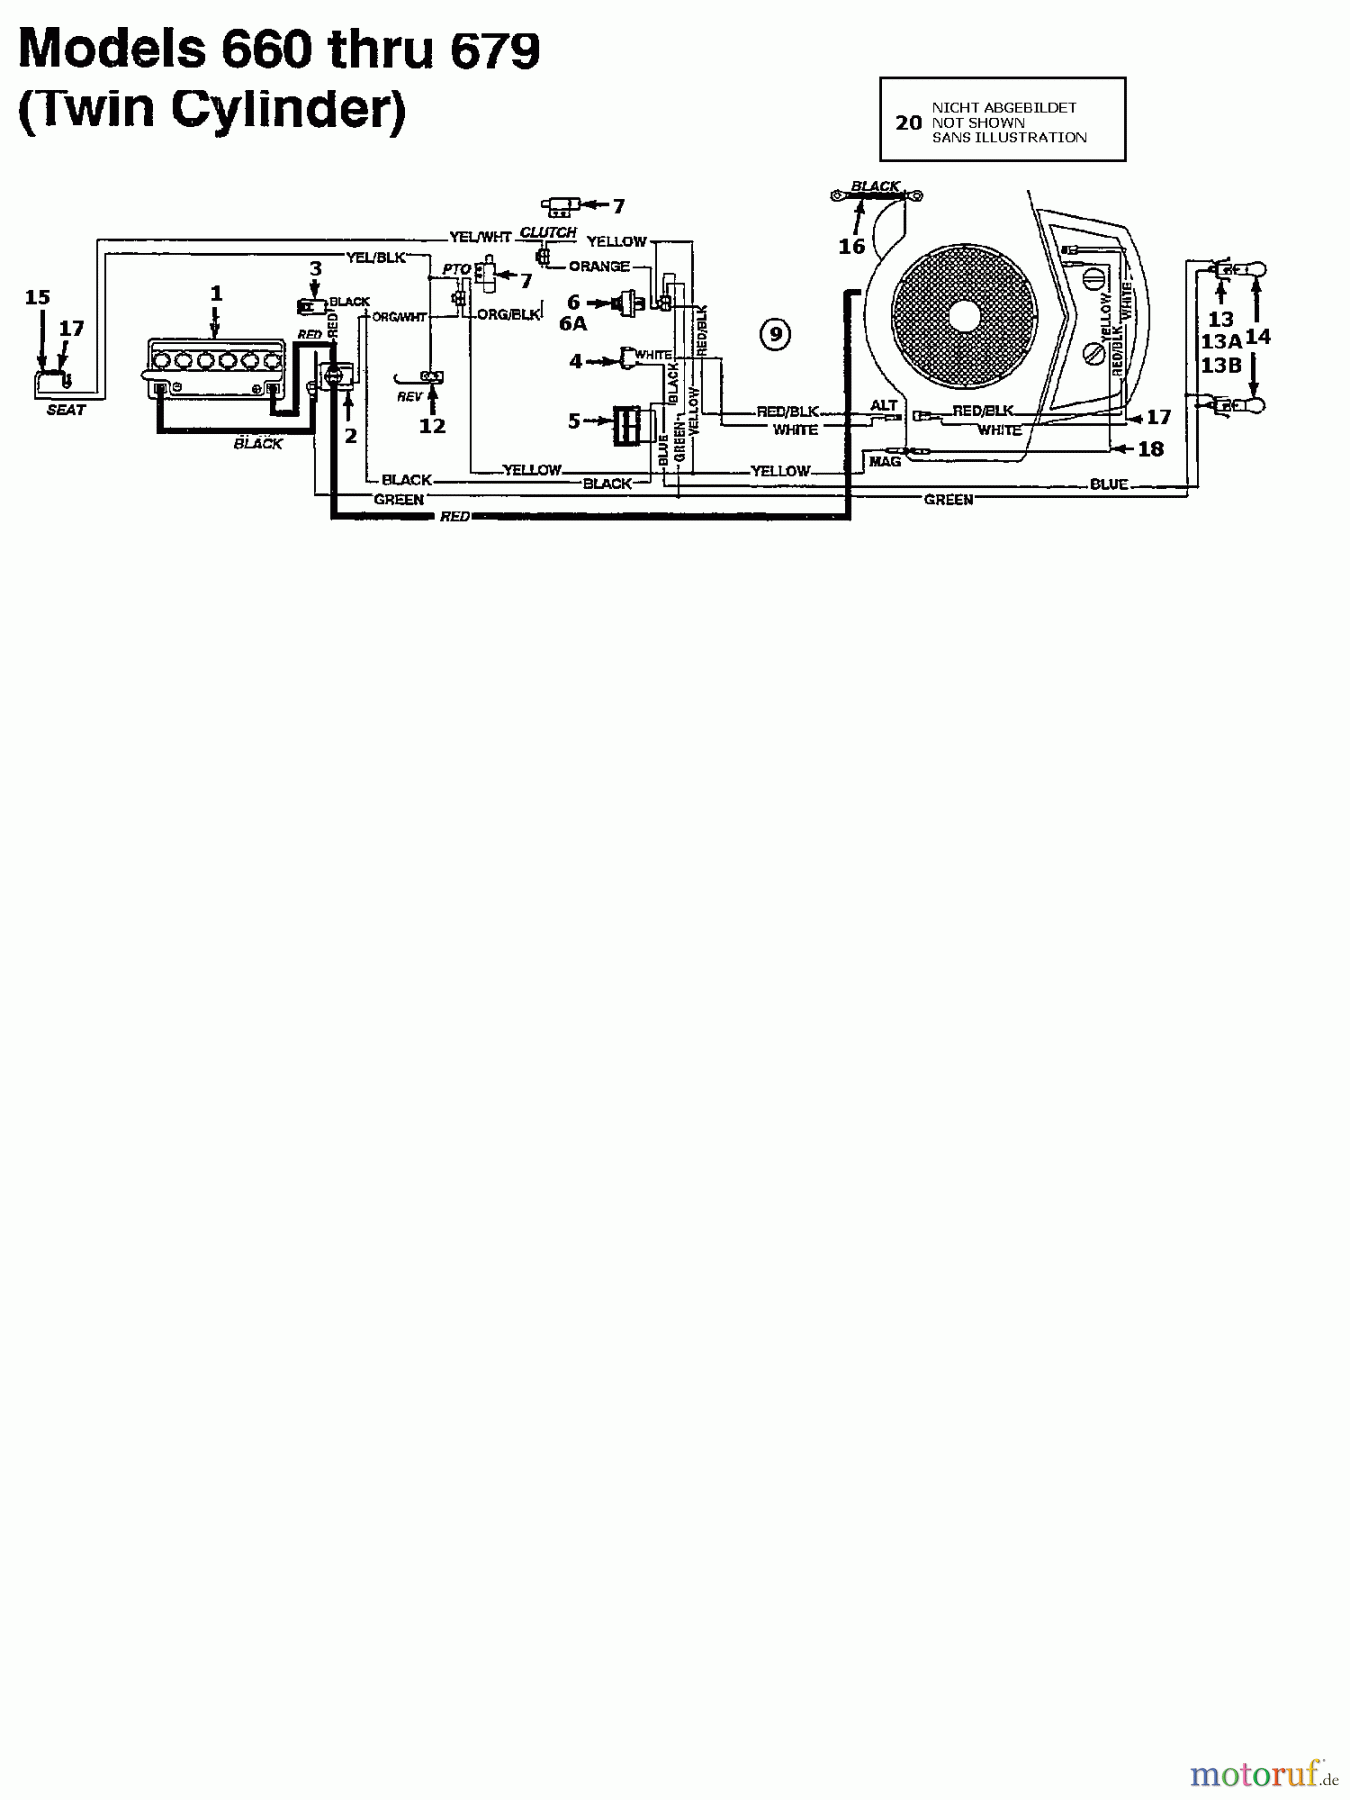  Columbia Lawn tractors 114/107 134S671G626  (1994) Wiring diagram twin cylinder